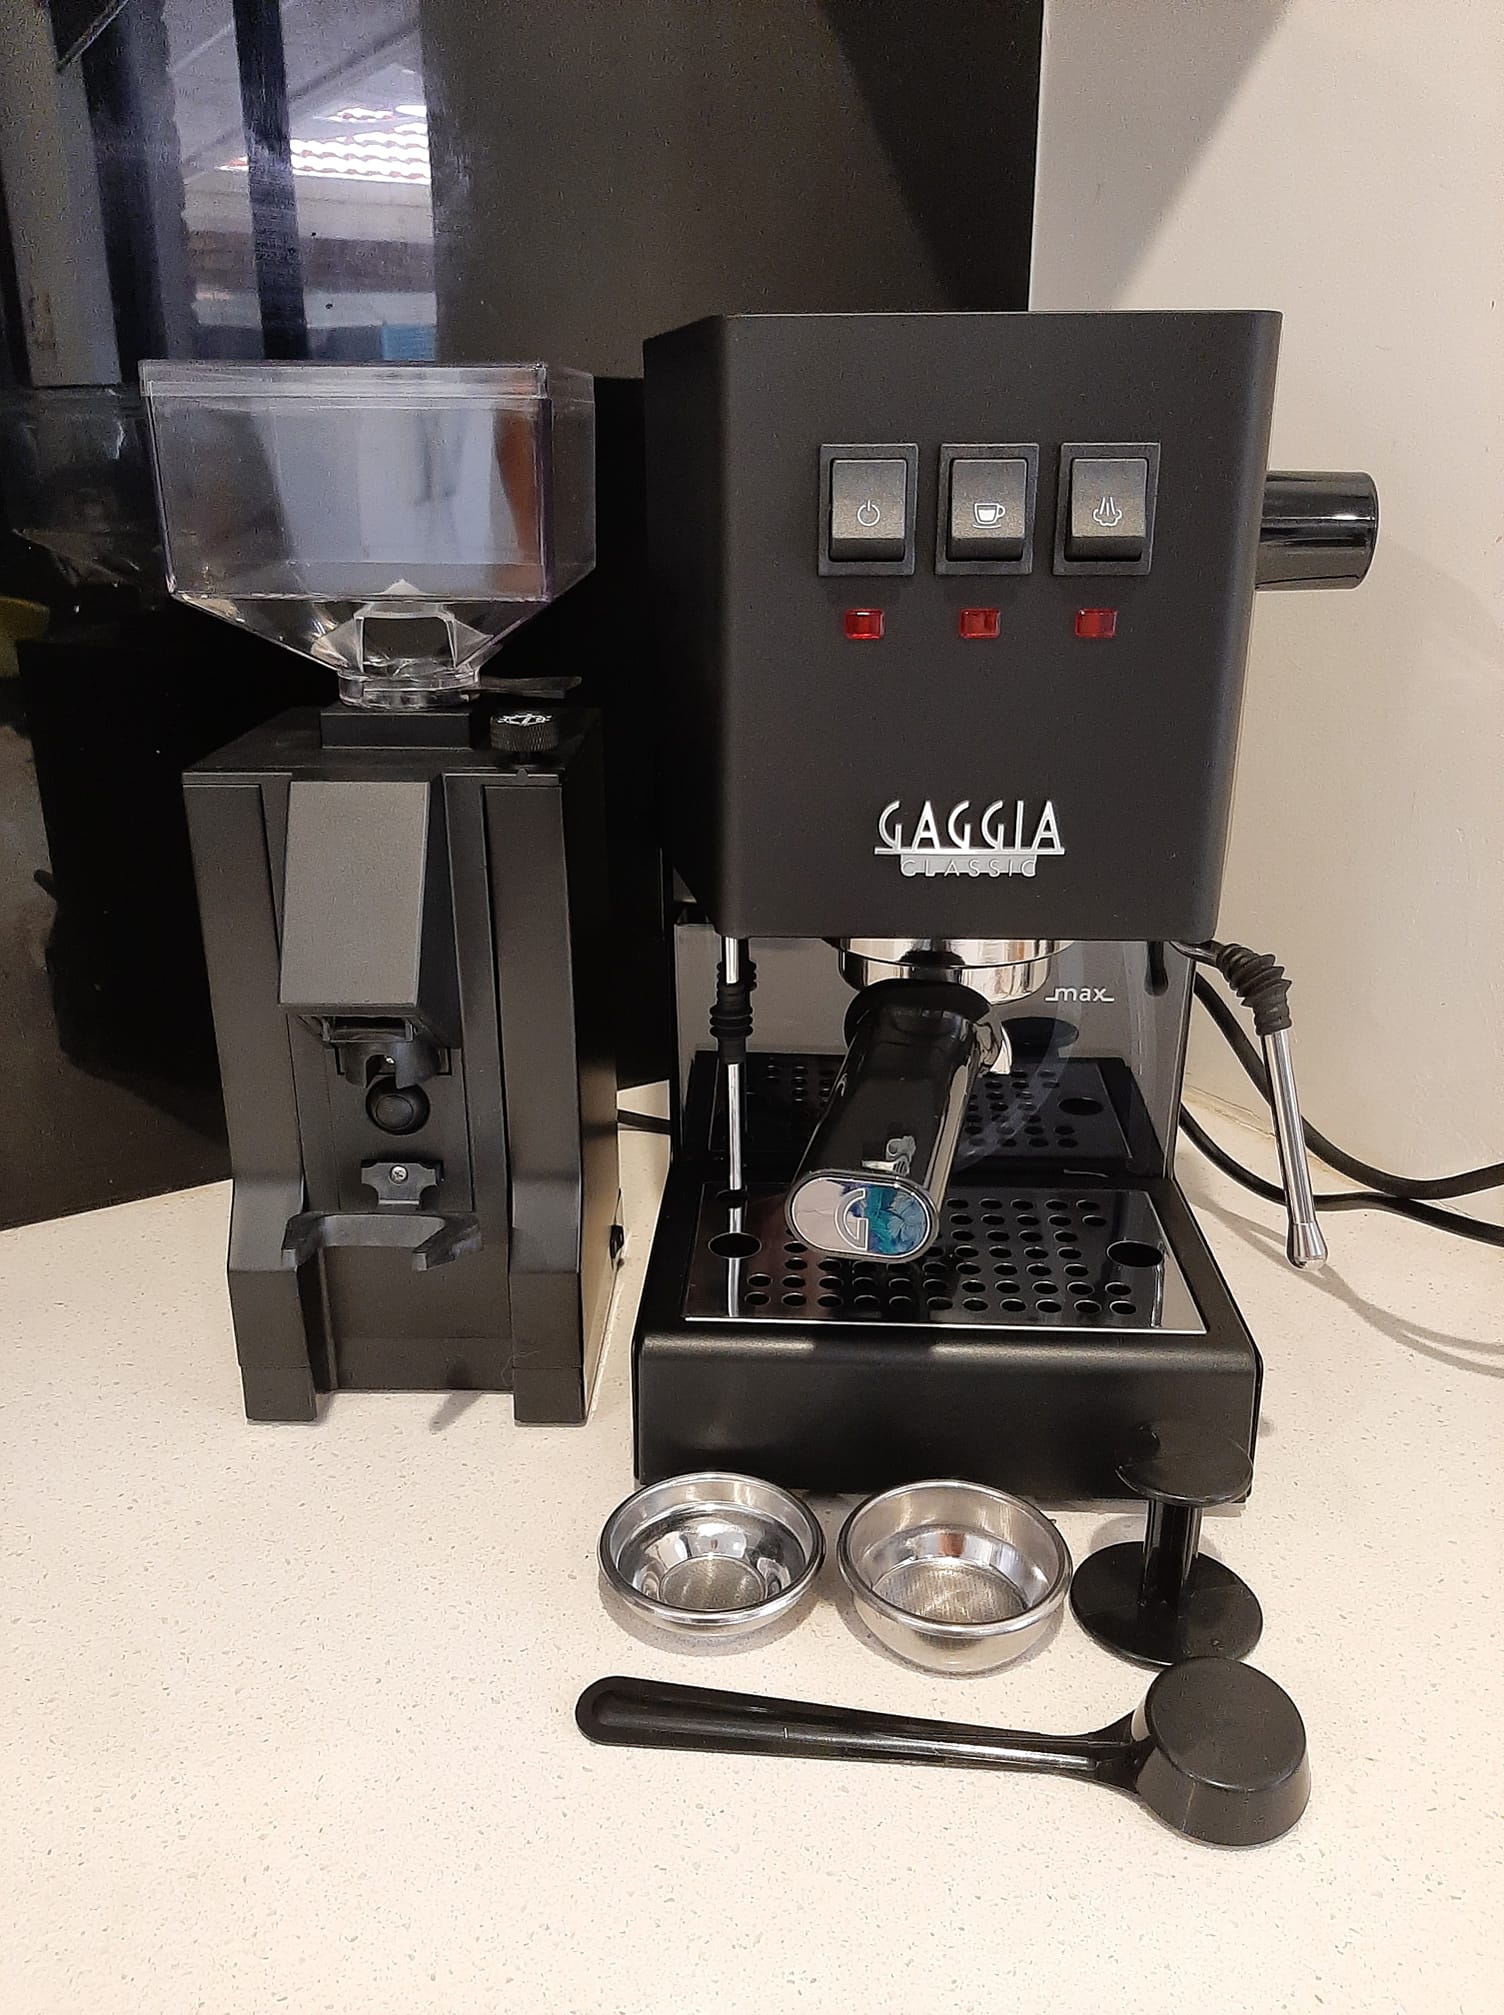 Gaggia Classic Pro is equipped with a 3-way solenoid valve